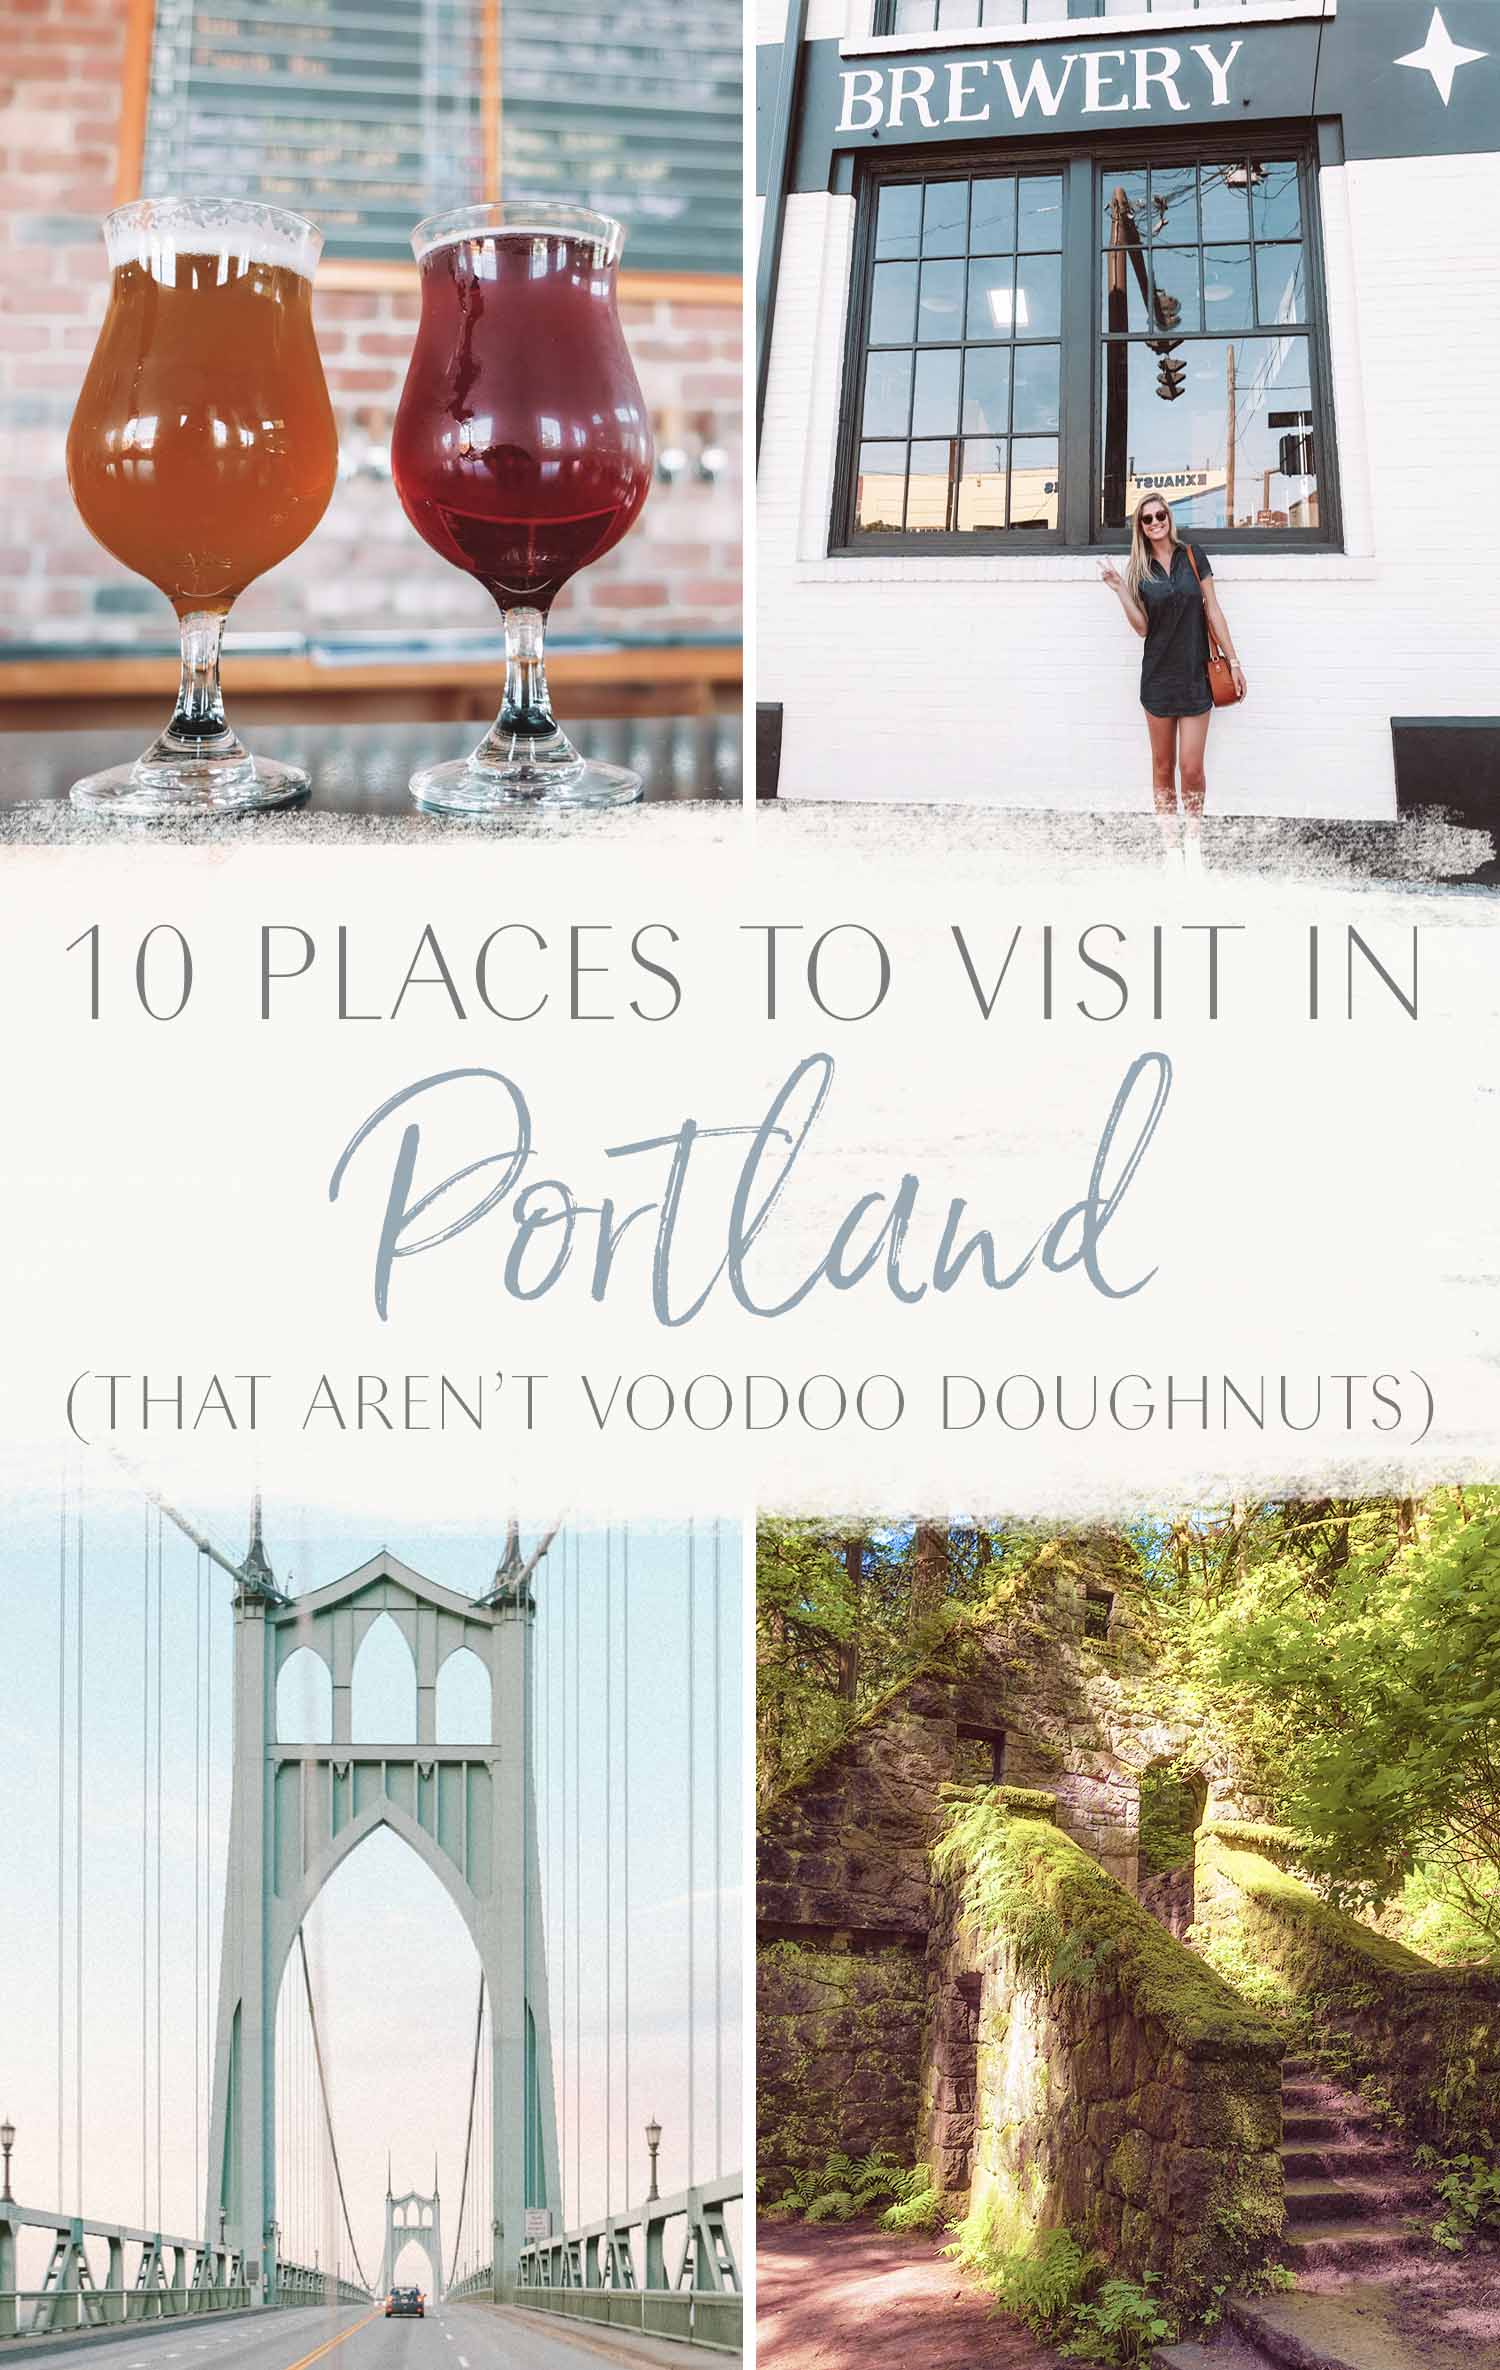 10 Places to Visit in Portland Not Voodoo